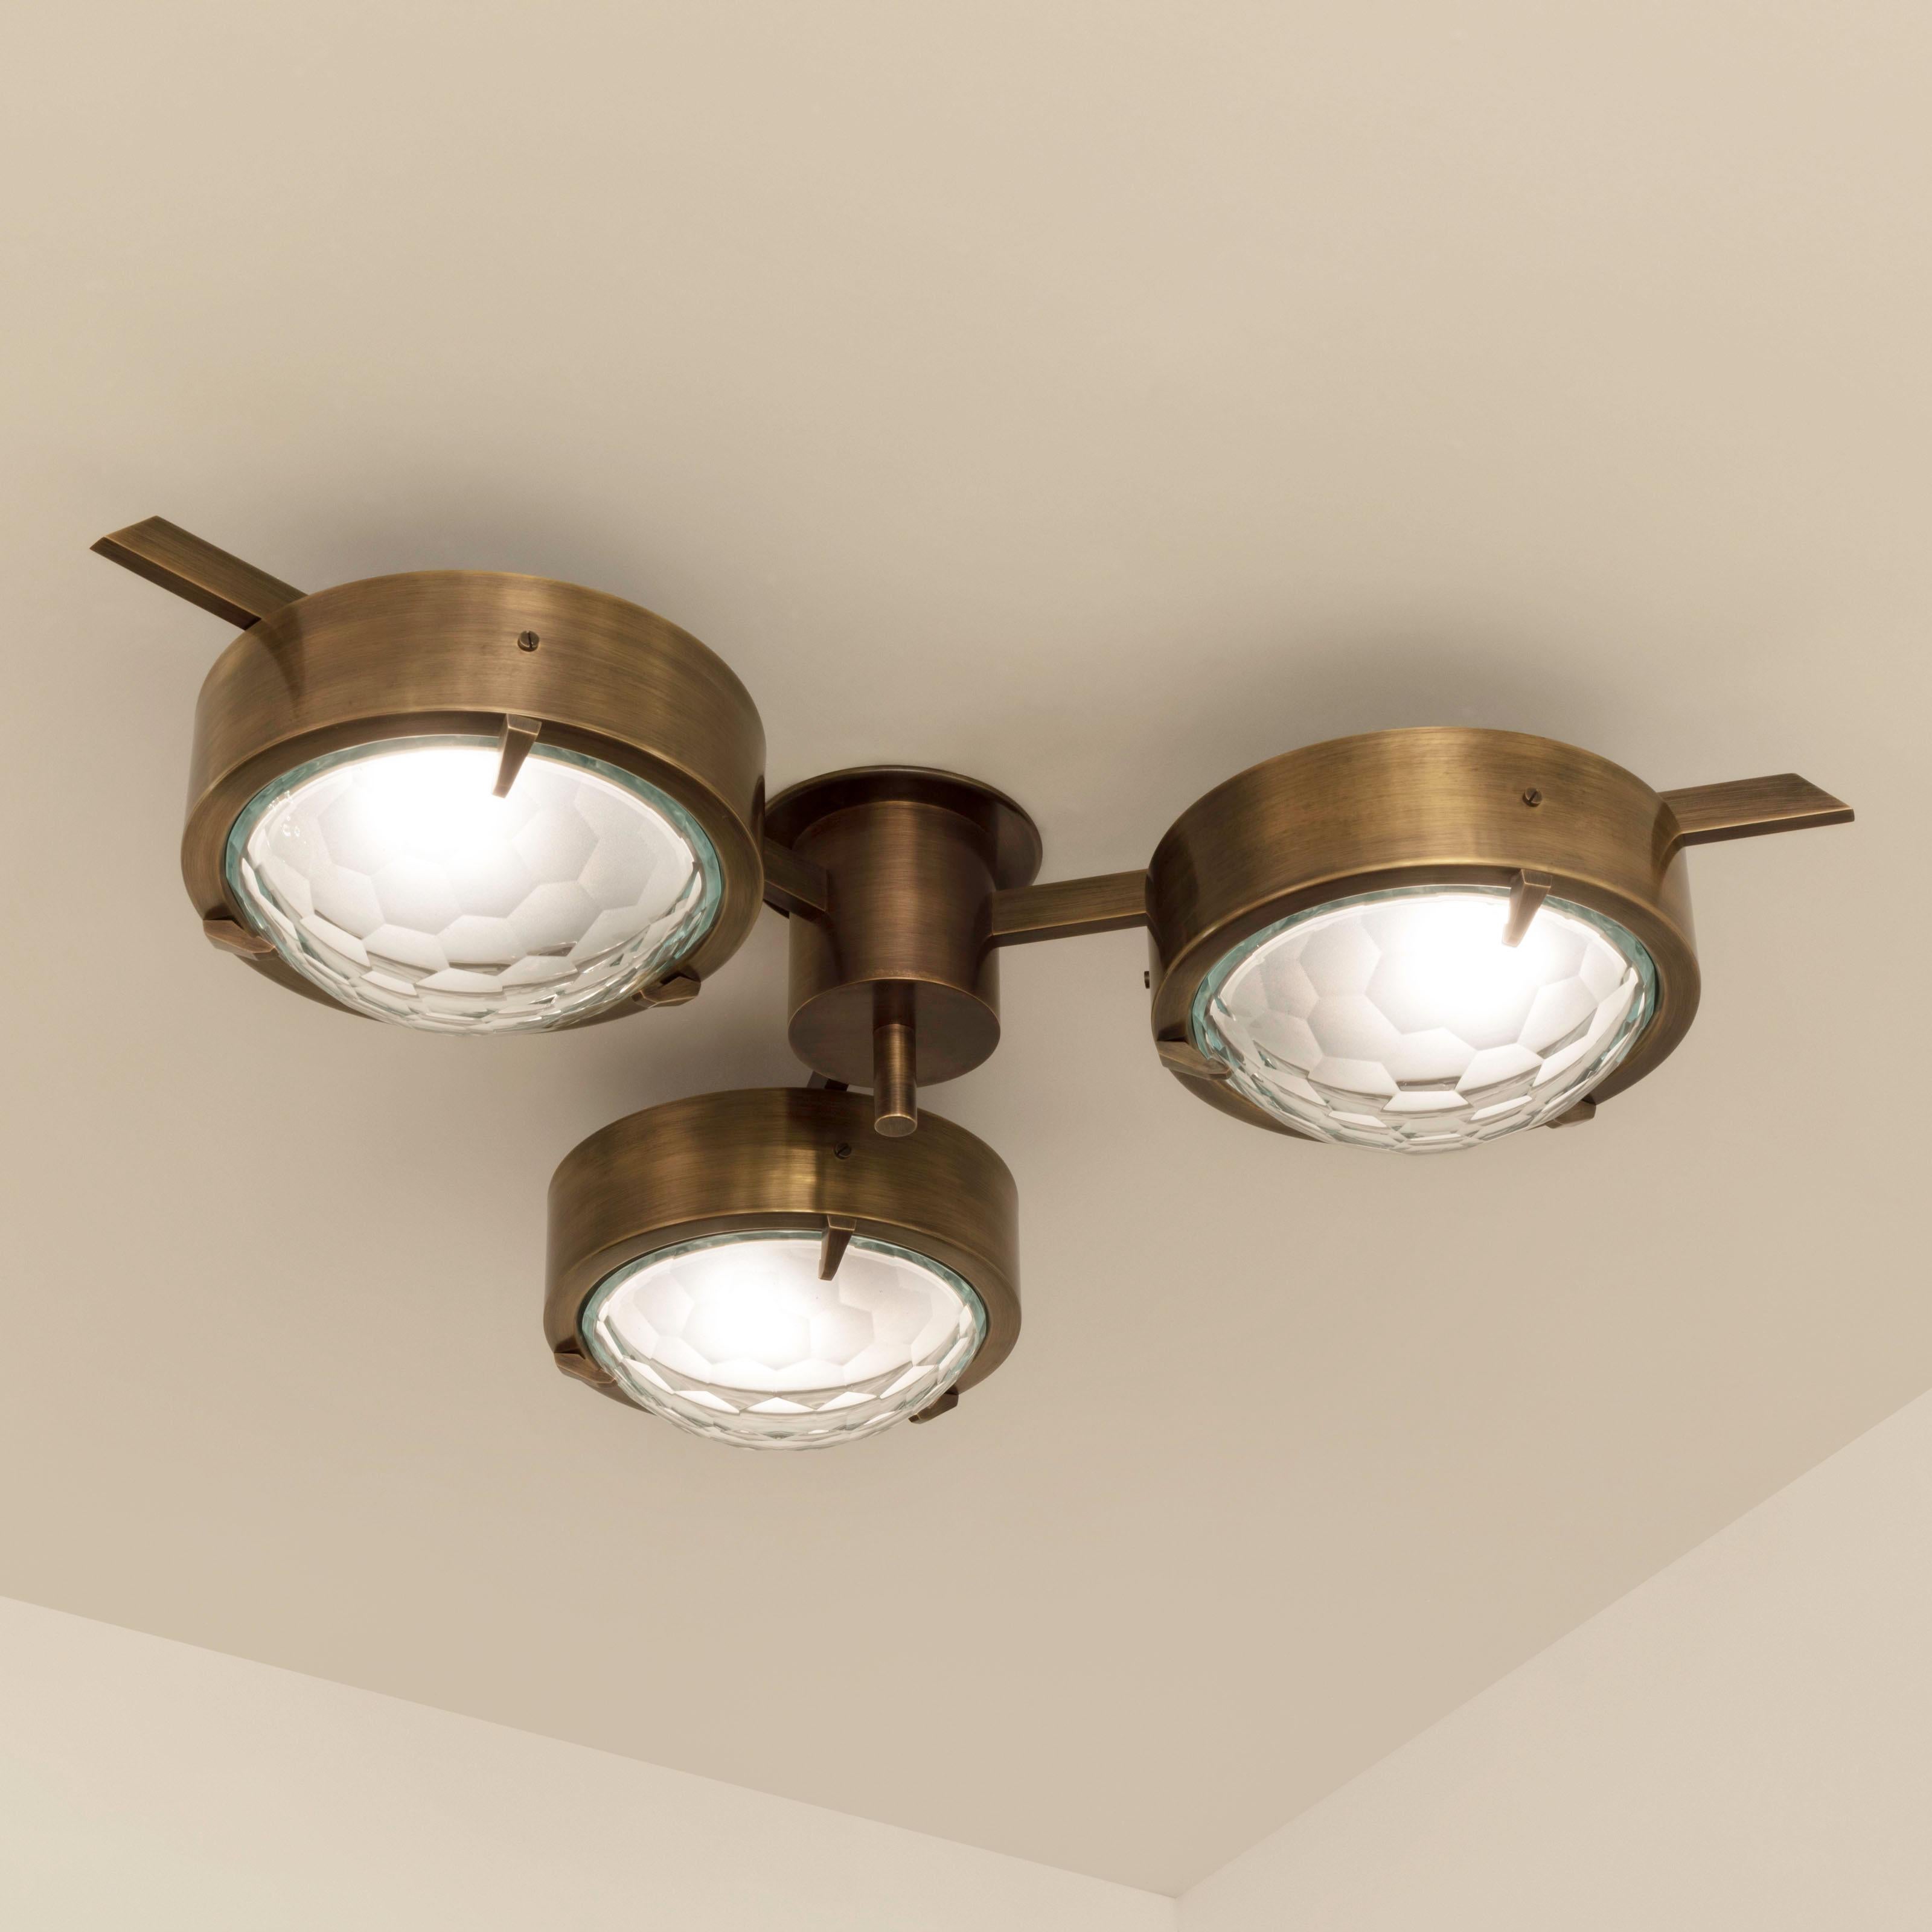 The Smeraldo ceiling light by form A features three shades hand faceted from thick starphire glass, balanced on a brass machined frame. Shown as a flush mount in our bronzo ottone finish.

Customization Options: 

Each fixture is handcrafted in